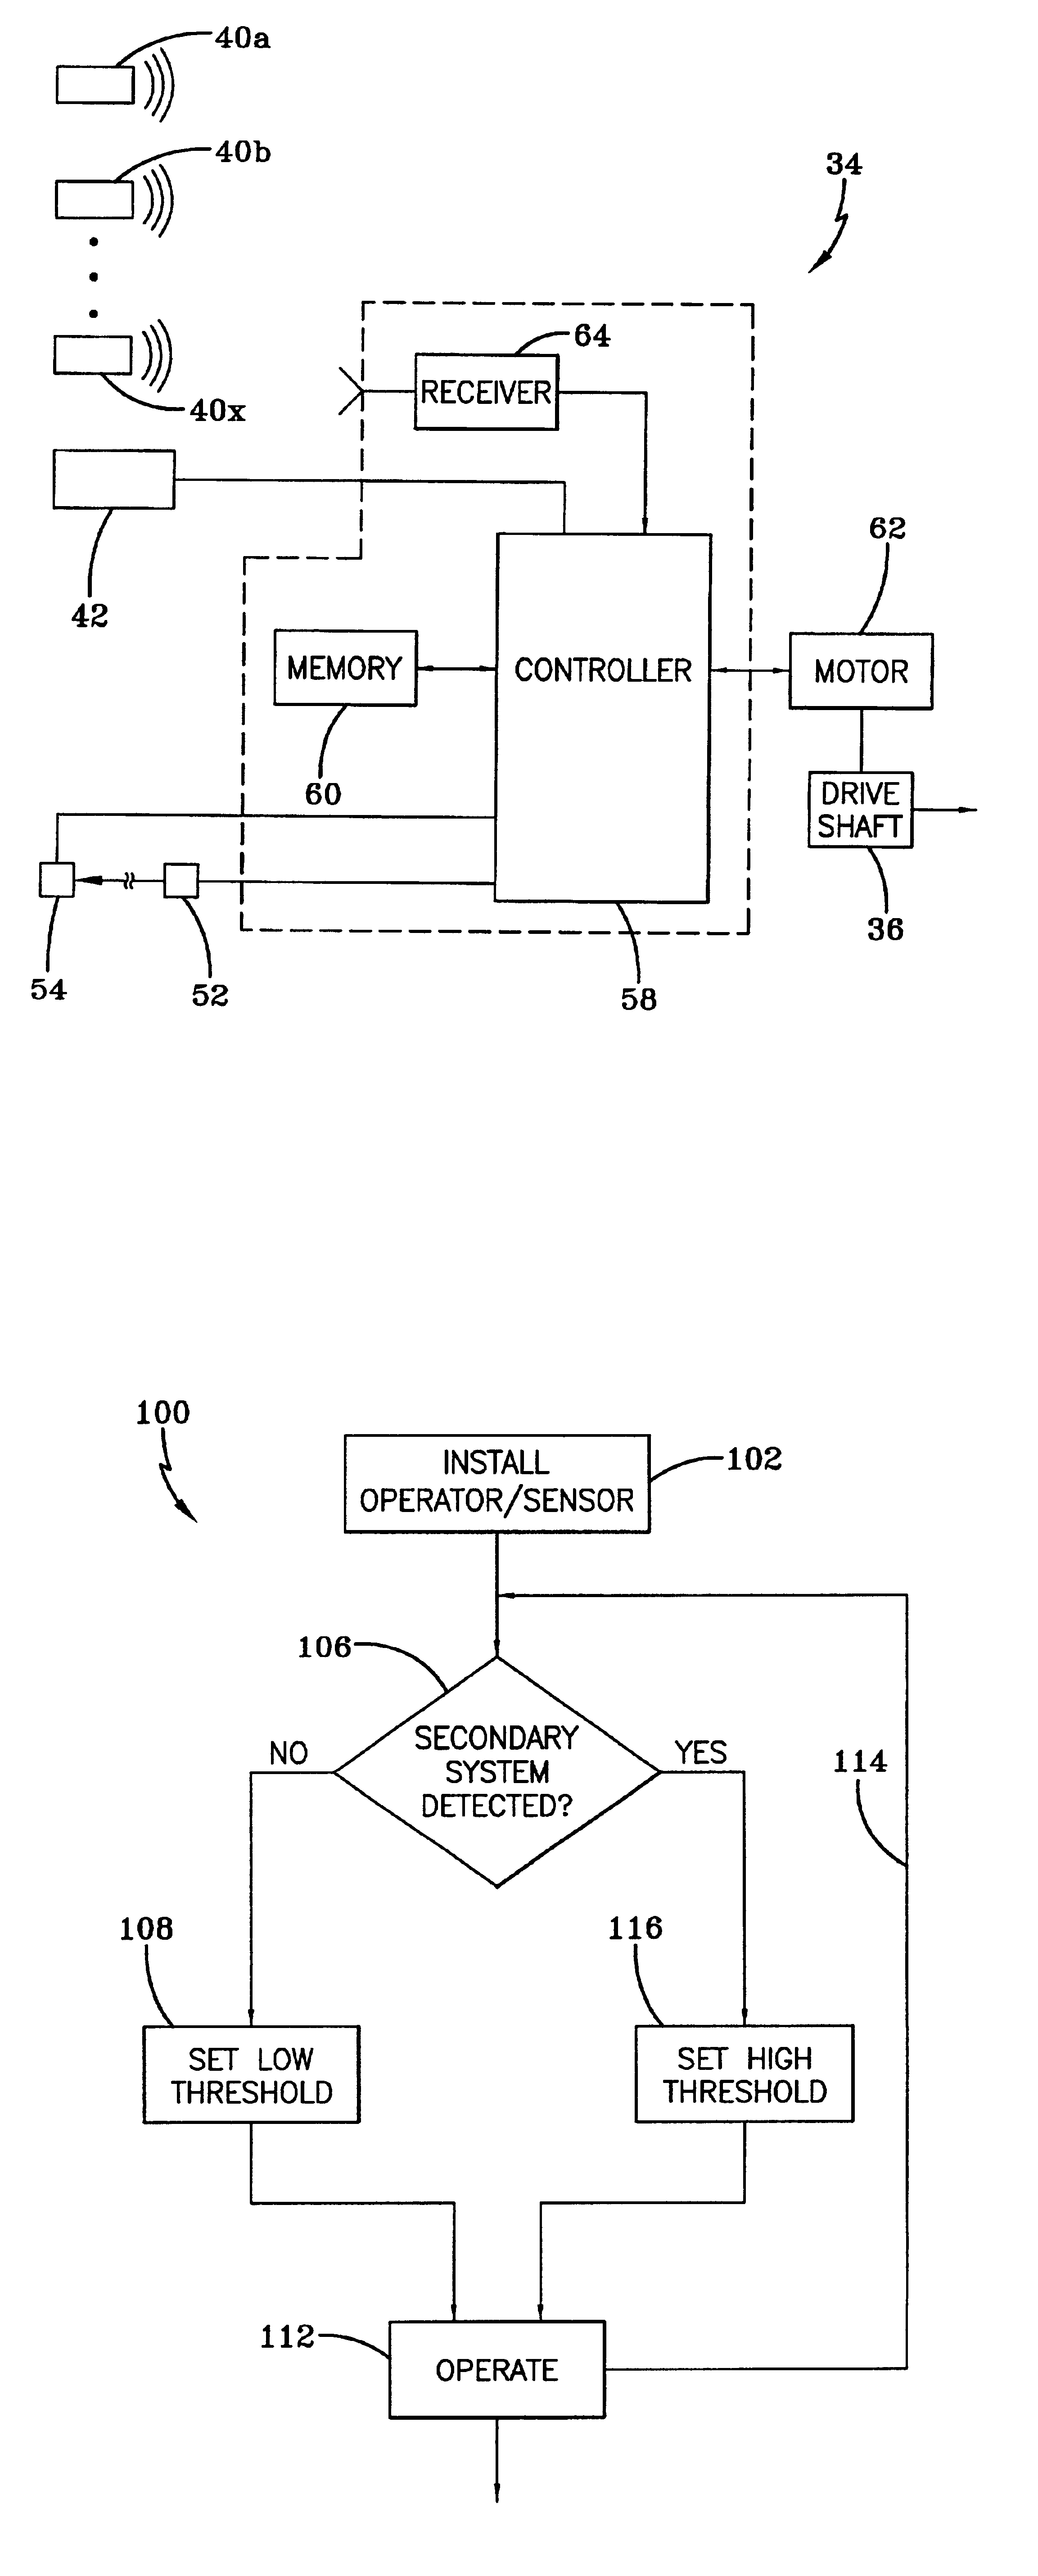 Method and device for adjusting an internal obstruction force setting for a motorized garage door operator